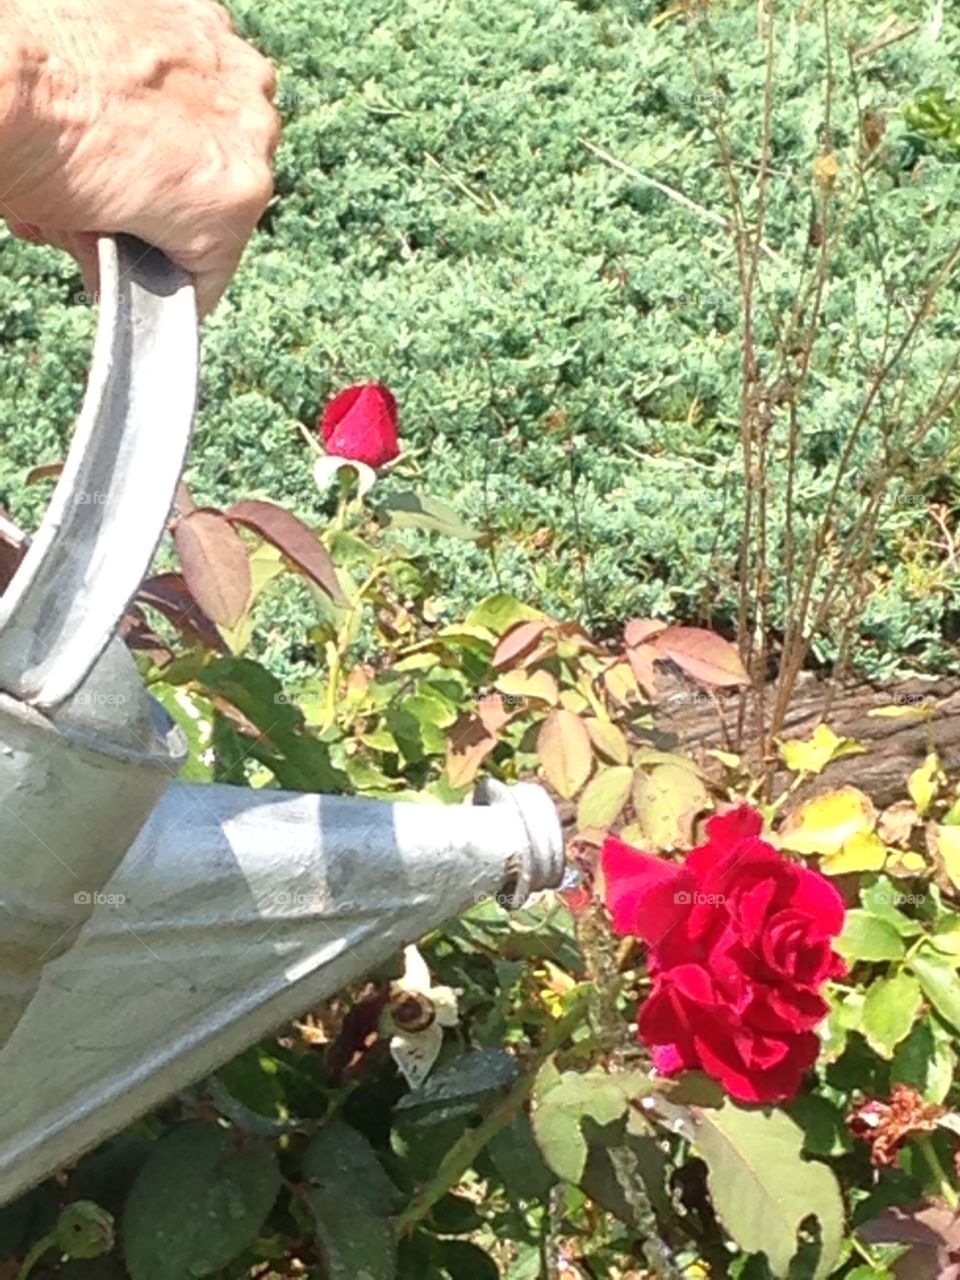 Caring for the roses, giving them water 